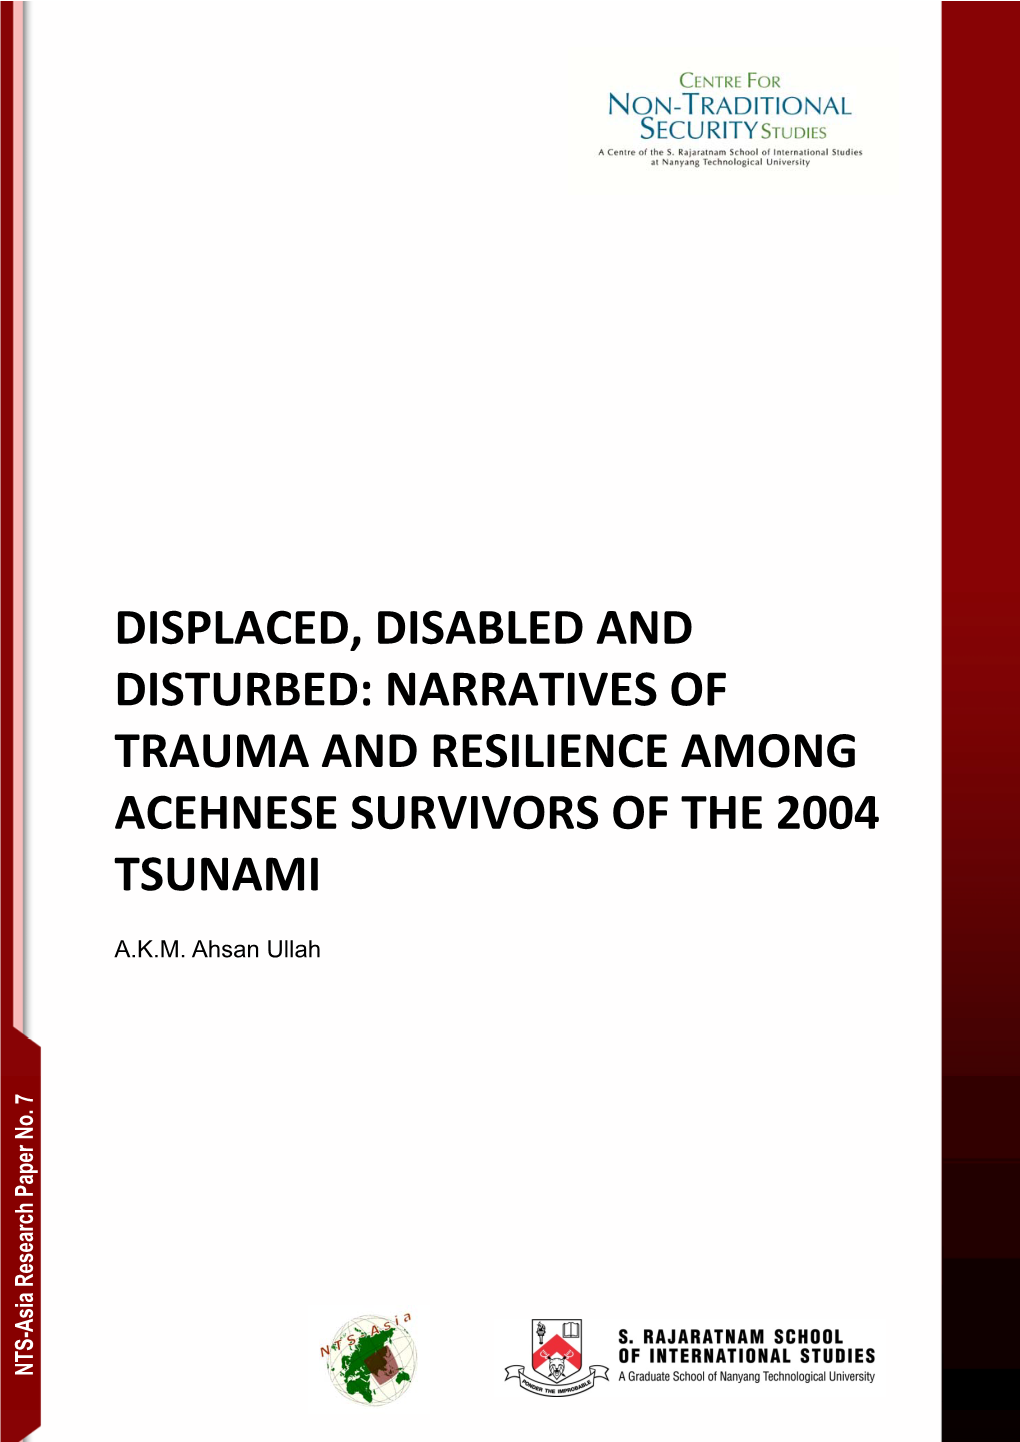 Narratives of Trauma and Resilience Among Acehnese Survivors of the 2004 Tsunami